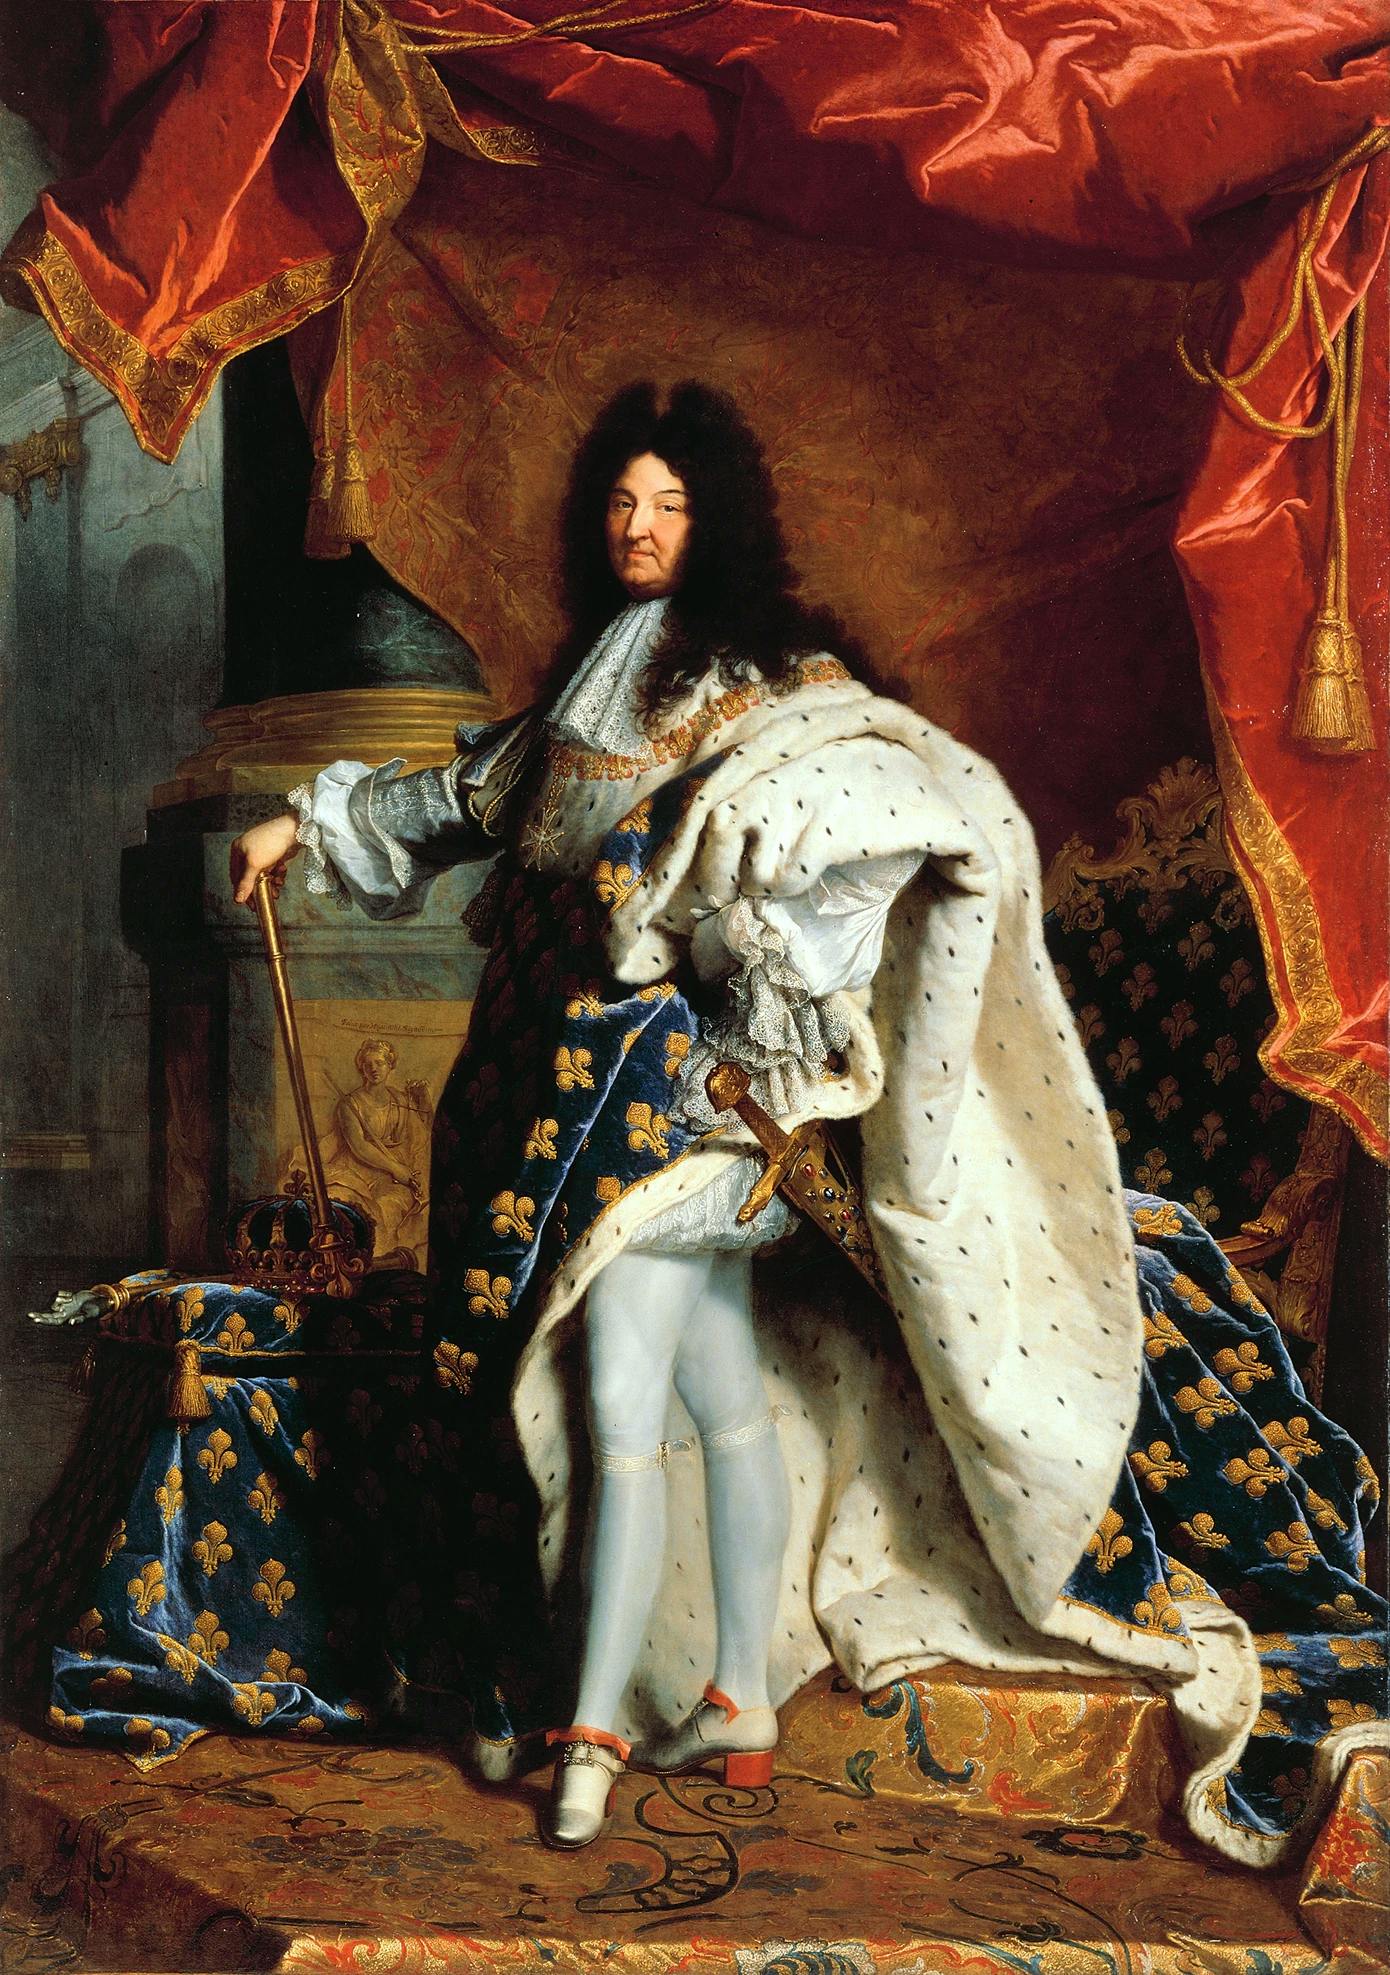 Portrait of King Louis XIV of France by Hyacinthe Rigaud, 1700. Public Domain via Wikimedia Commons